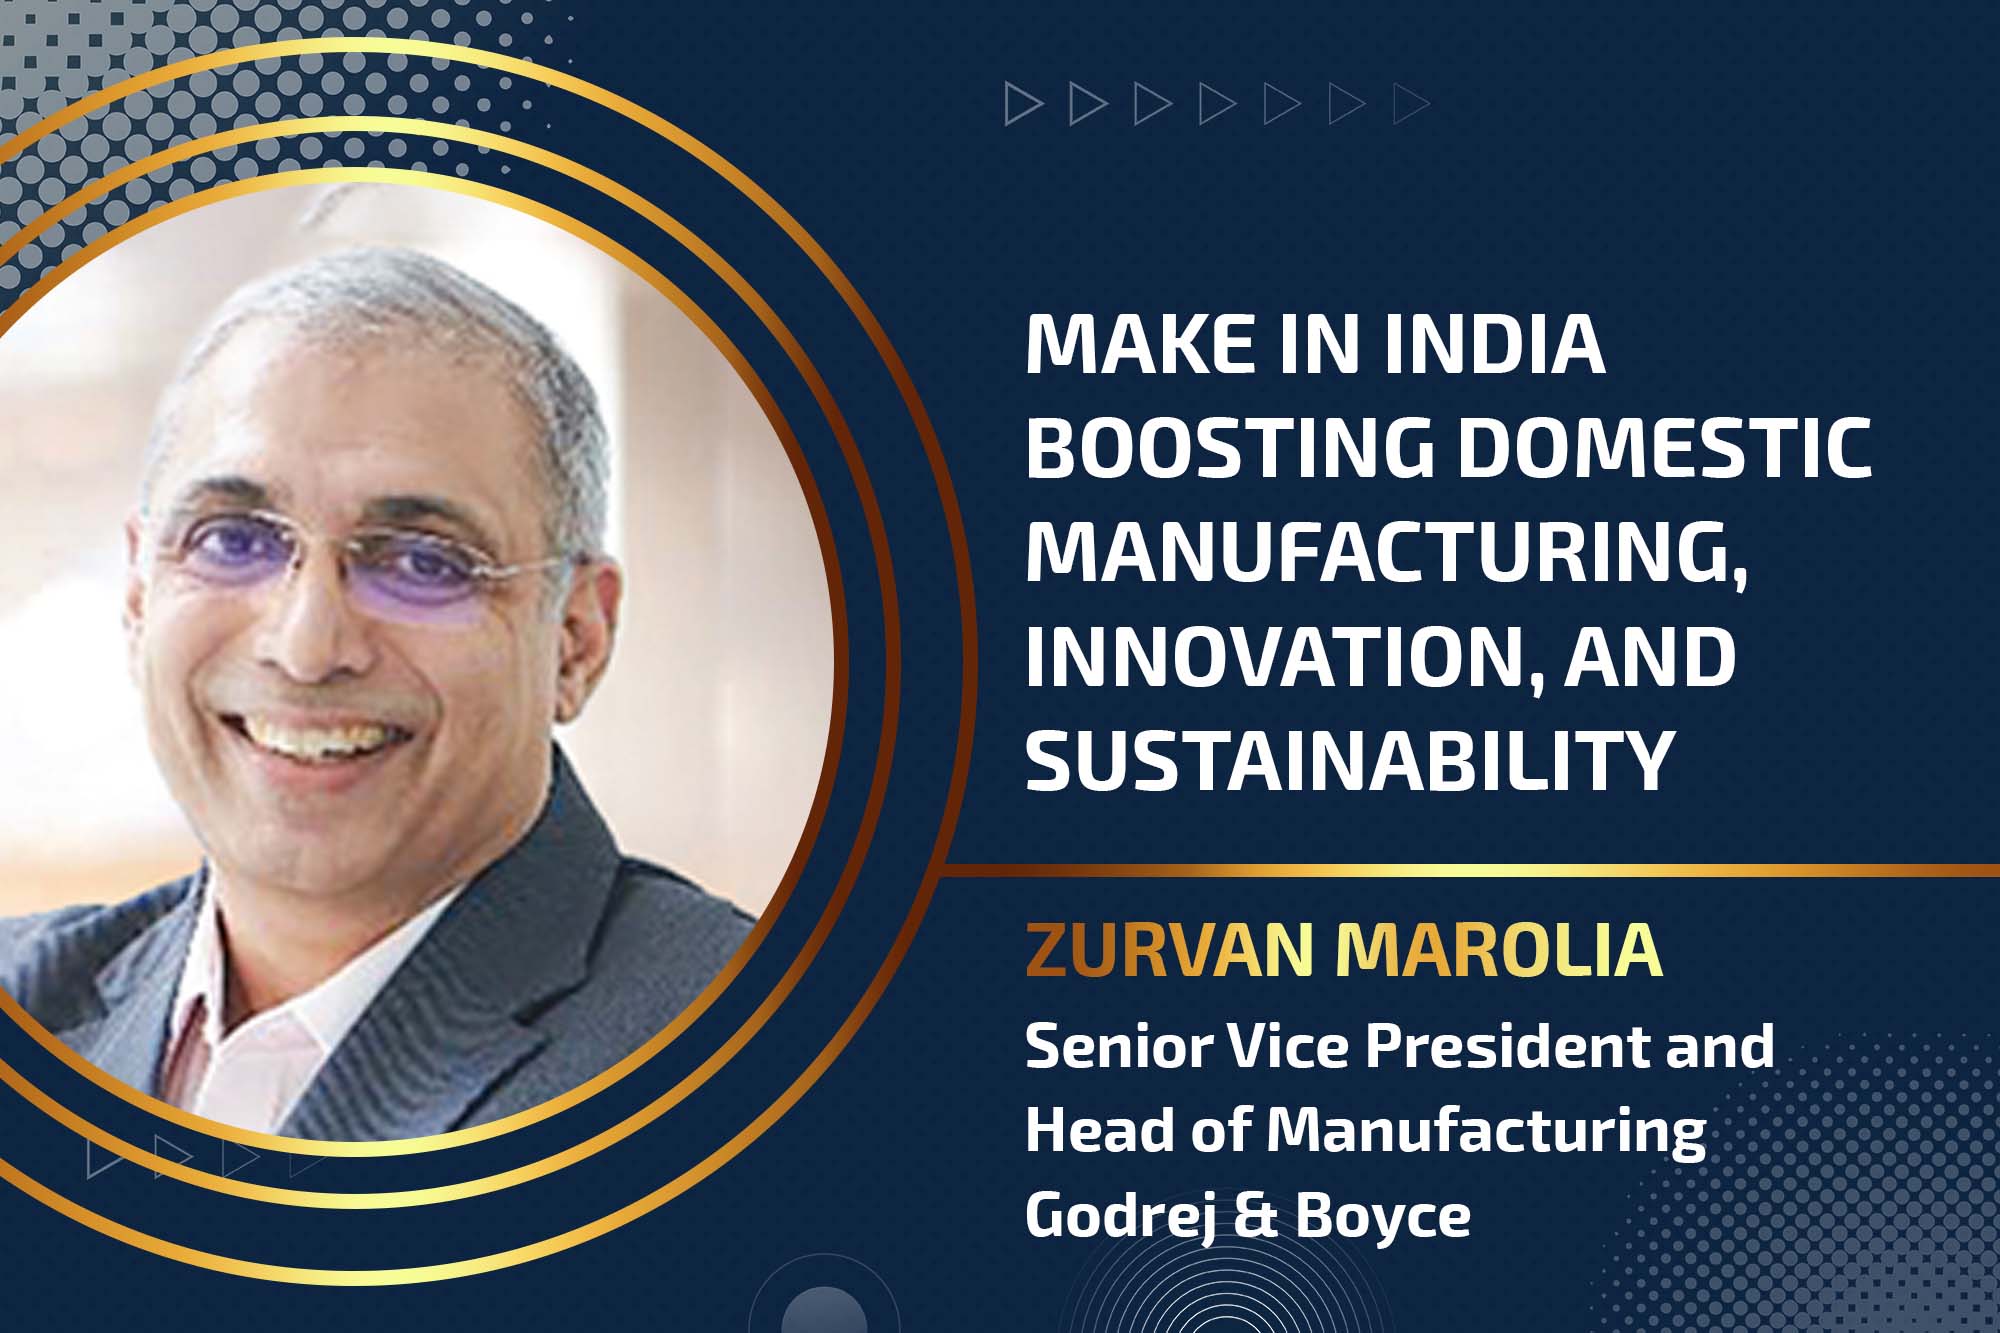 Make in India boosting domestic manufacturing, innovation, and sustainability